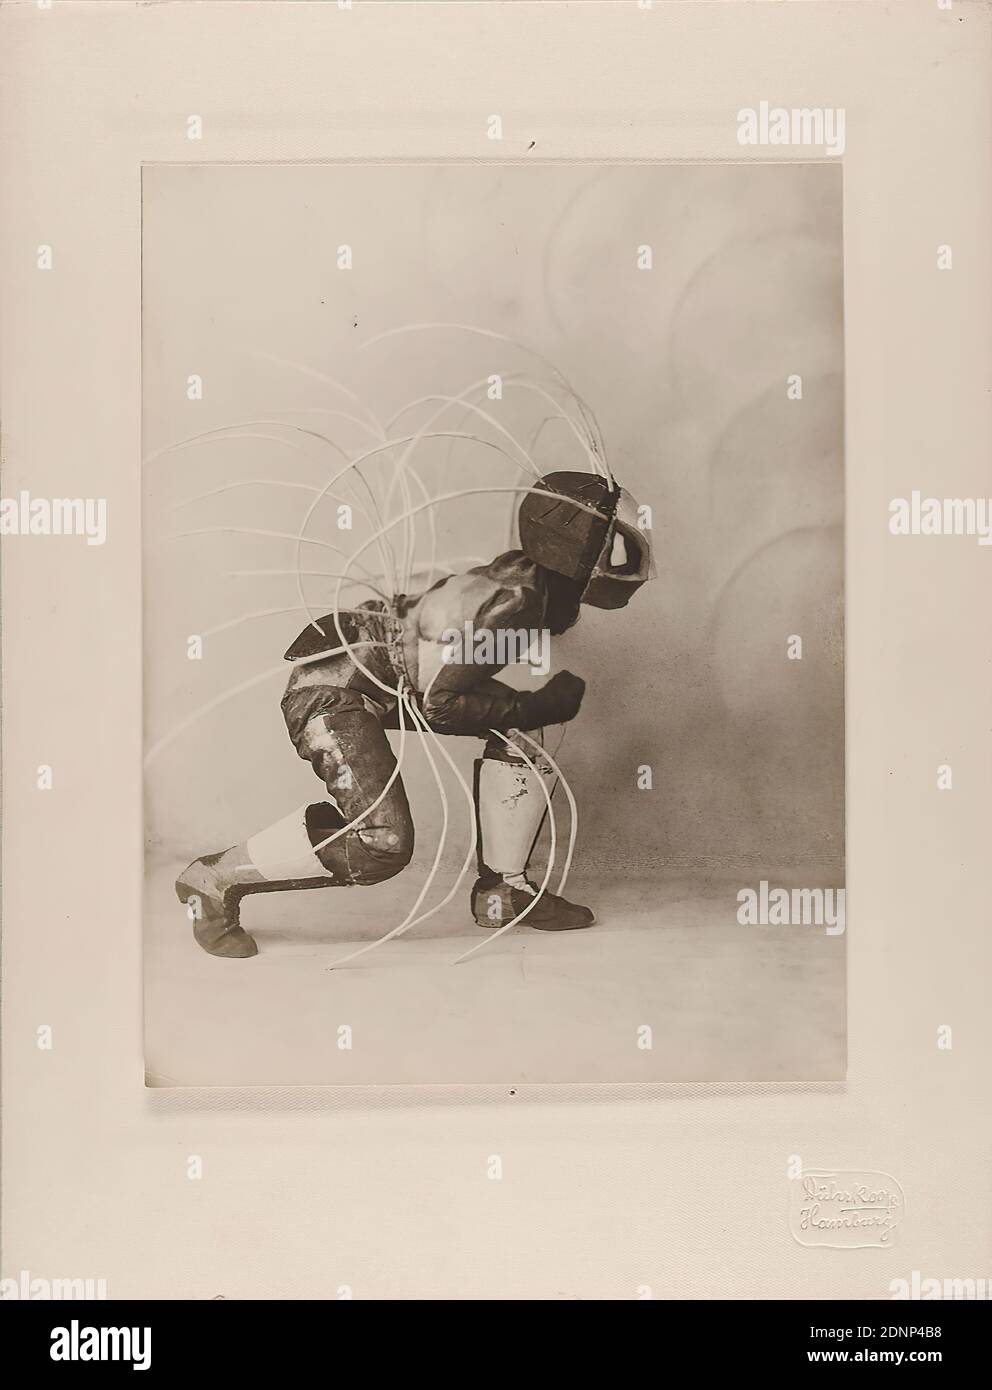 Minya Diez-Dührkoop, dance mask Toboggan Frau by Lavinia Schulz, silver gelatin paper, black and white positive process, image size: height: 22.10 cm; width: 16.80 cm, dry stamp: recto u. r. on the cardboard: Dührkoop, Hamburg, inscribed: recto u. r. on the cardboard handwritten in lead: Mus. f. Kunst u. Gewerbe Hamburg, old and new inv.no, repro no, Toboggan; on verso and handwritten in lead: old inv.no, repro no, dimensions, signed: recto and left: in the picture (very weakly) exposed handwriting Dührkoop, theater photography, dancing Stock Photo